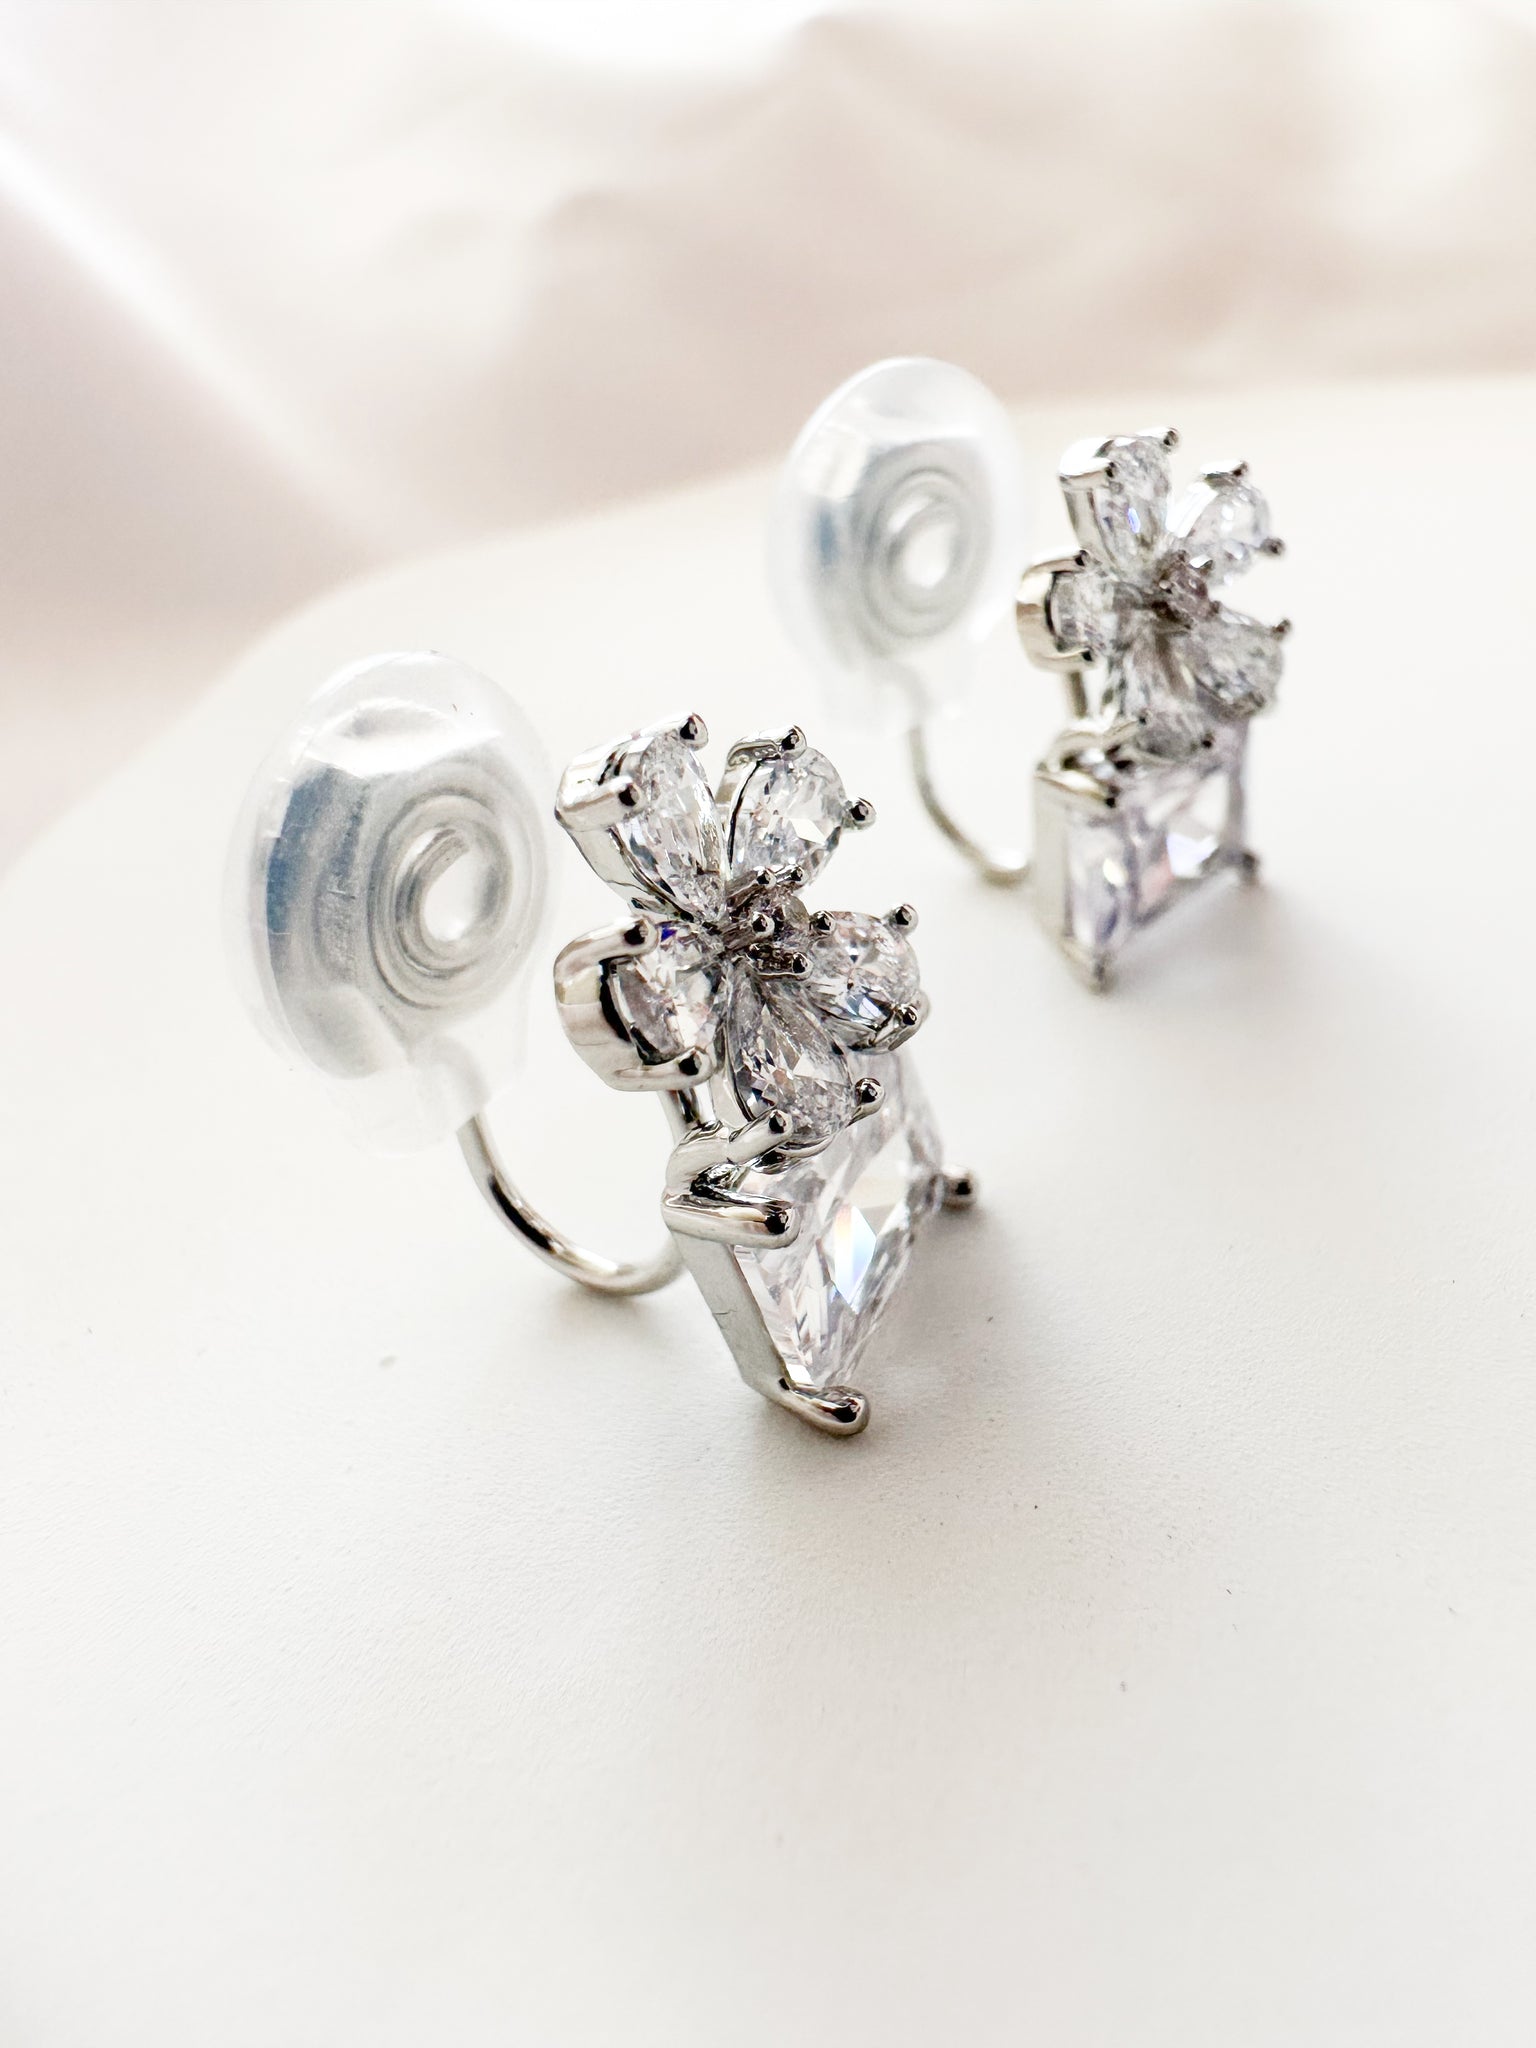 silver & white cubic zirconia shaped into a flower atop a square gem clipon earrings